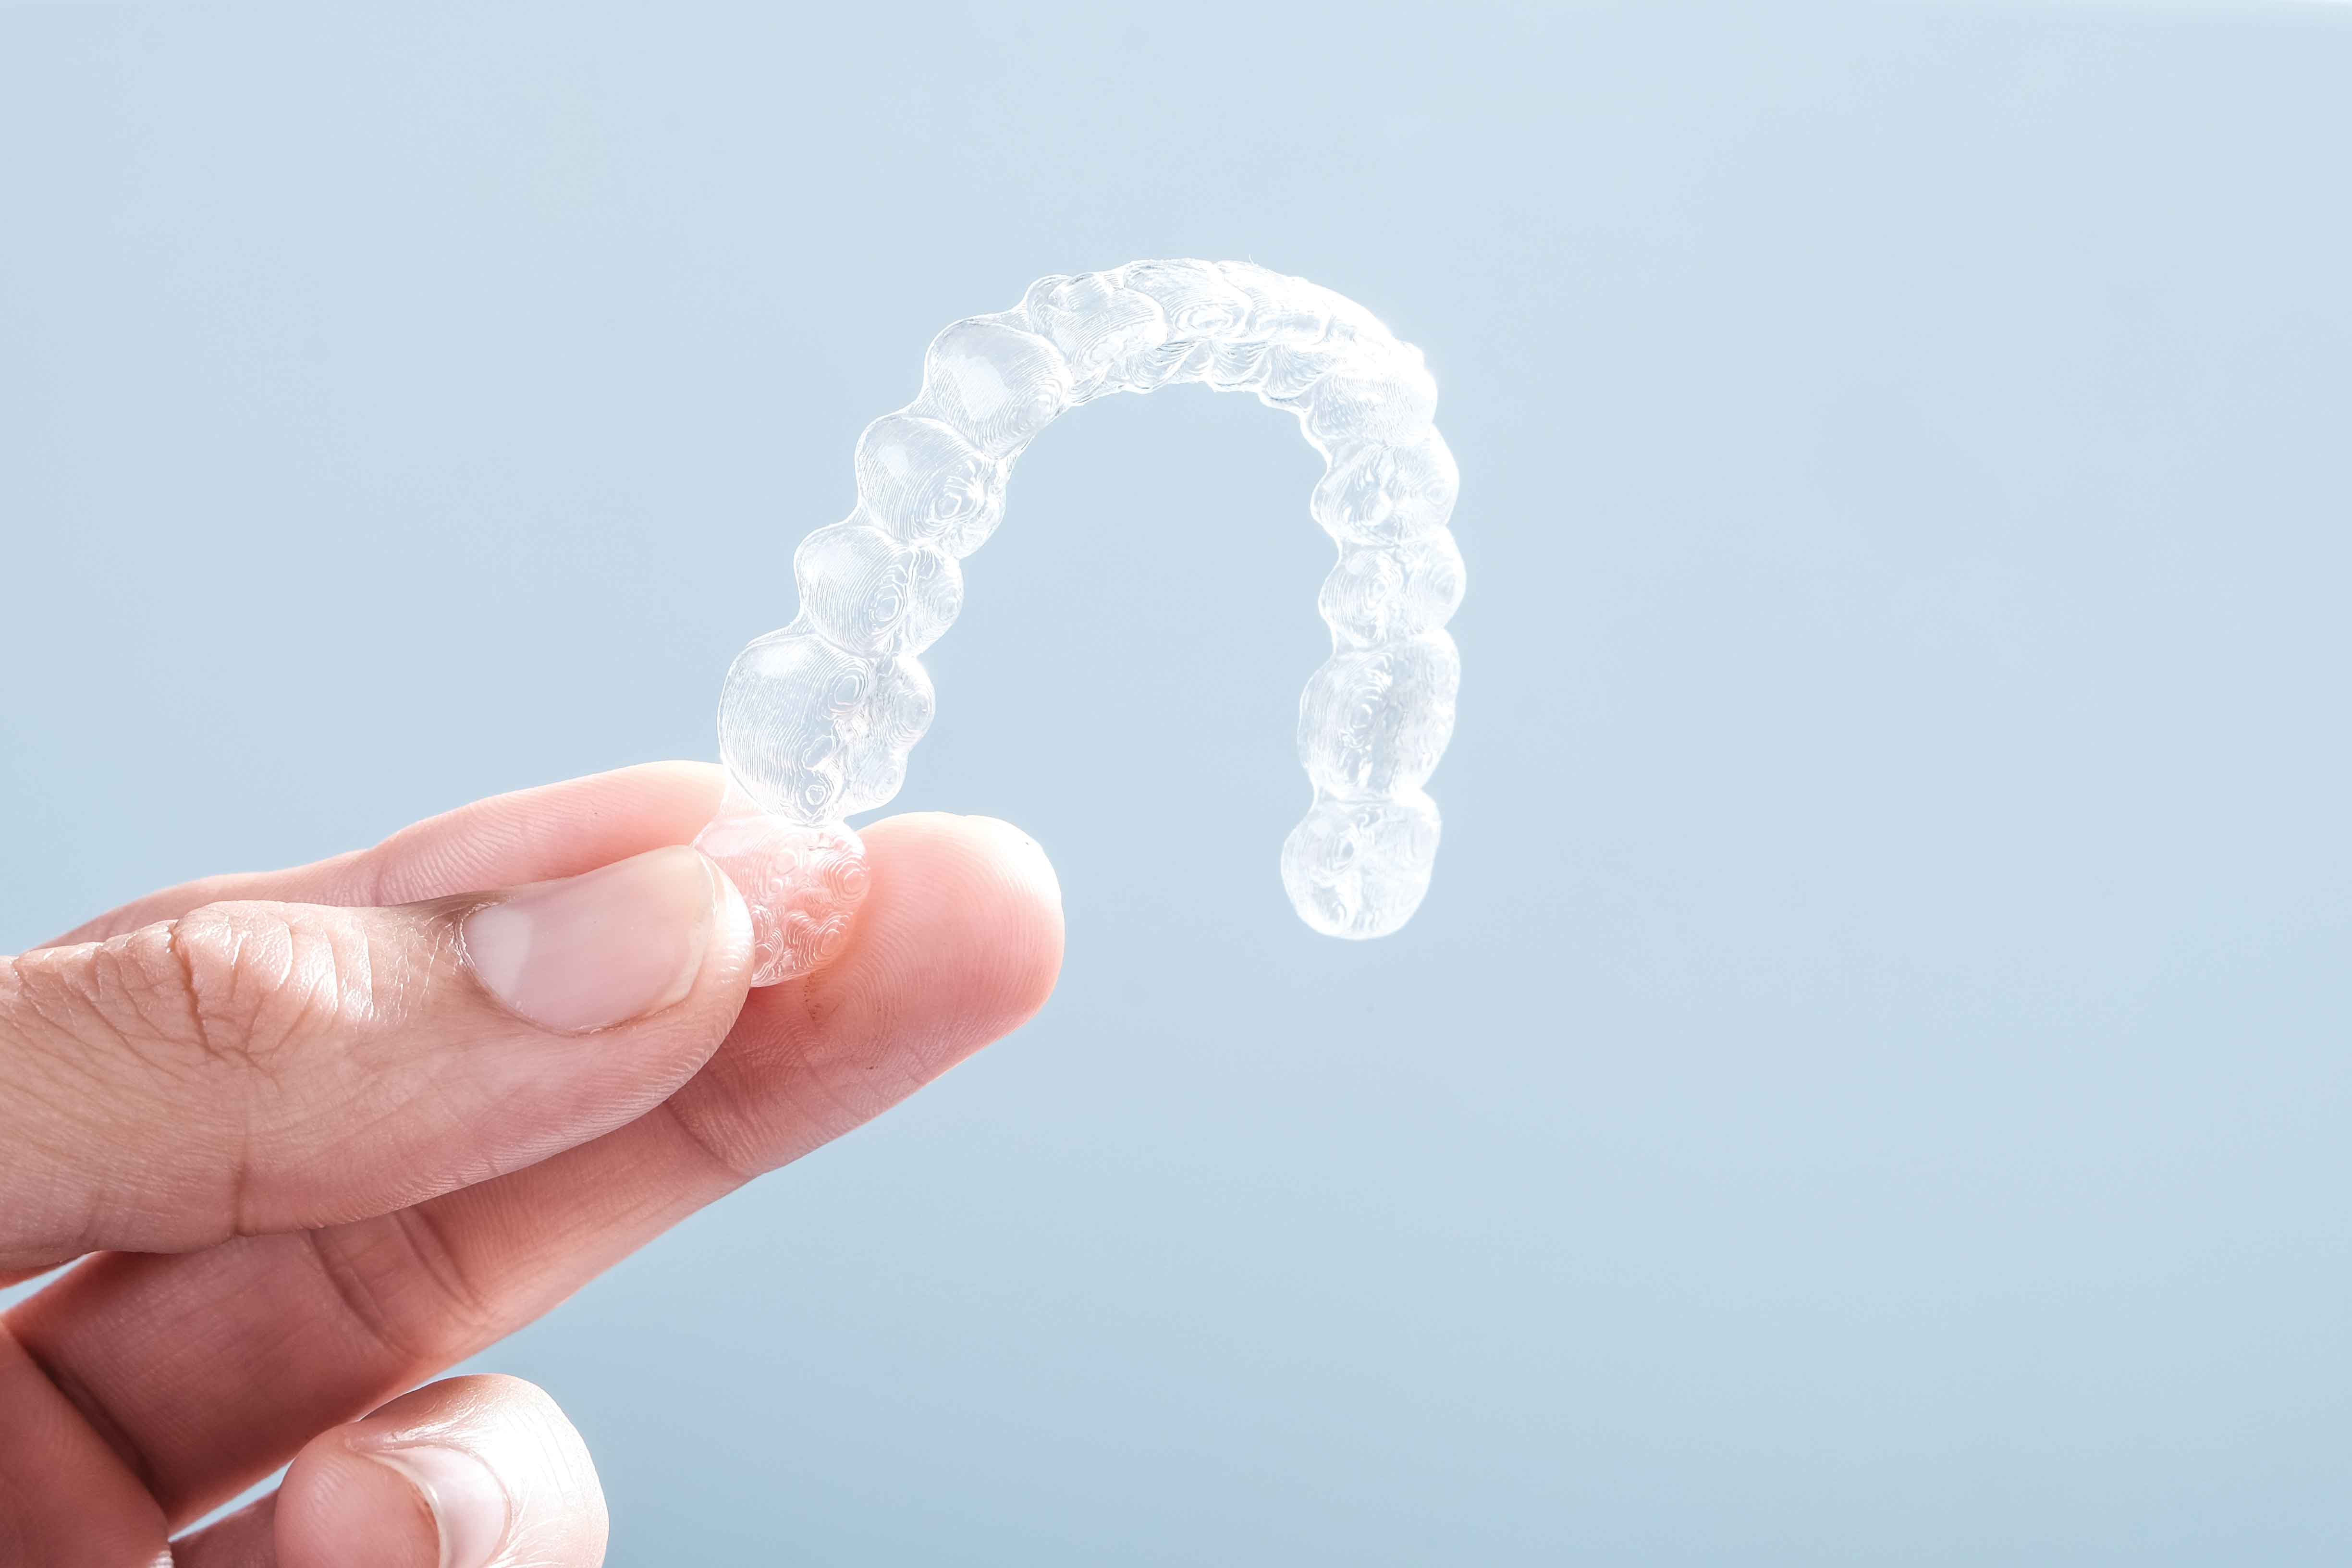 Oman wellness: Too old for braces? Why not try Invisalign